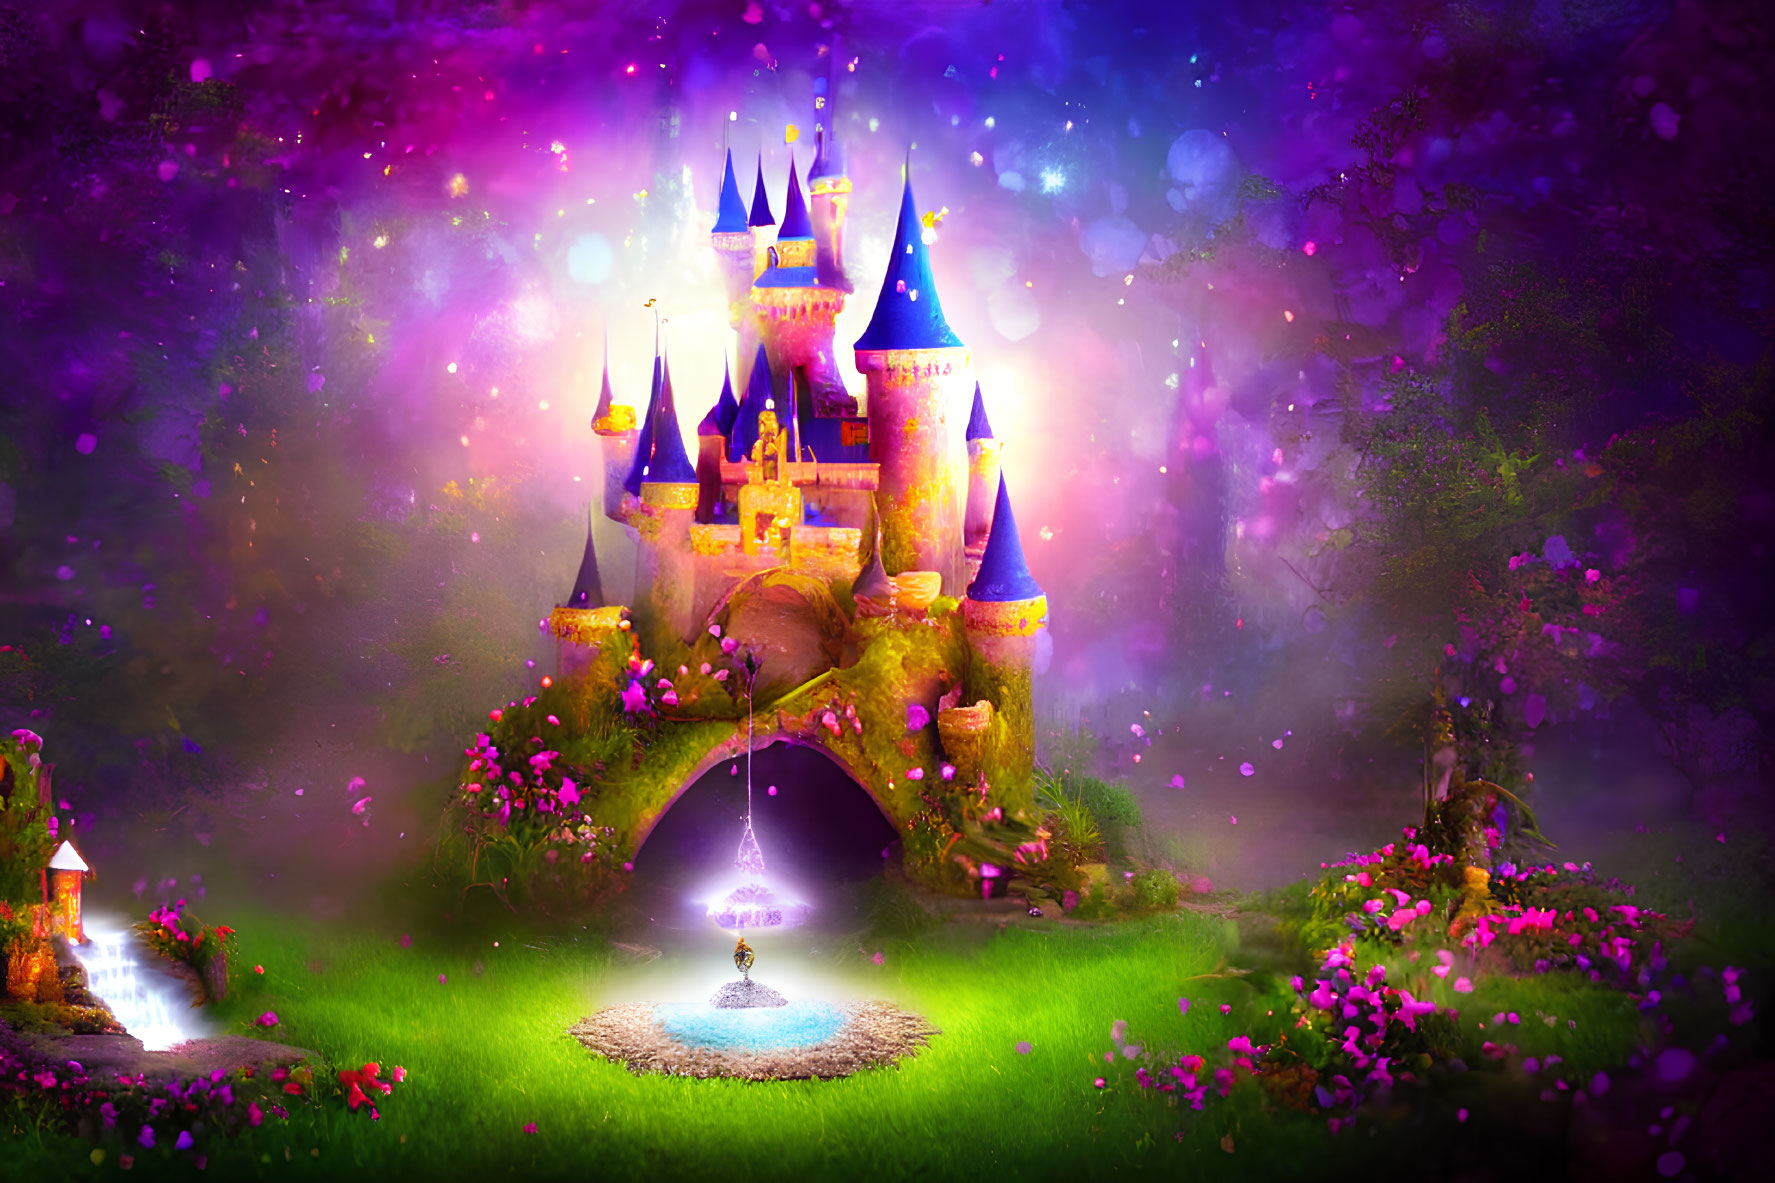 Mystical Castle in Vibrant Landscape with Pink Flowers and Celestial Backdrop